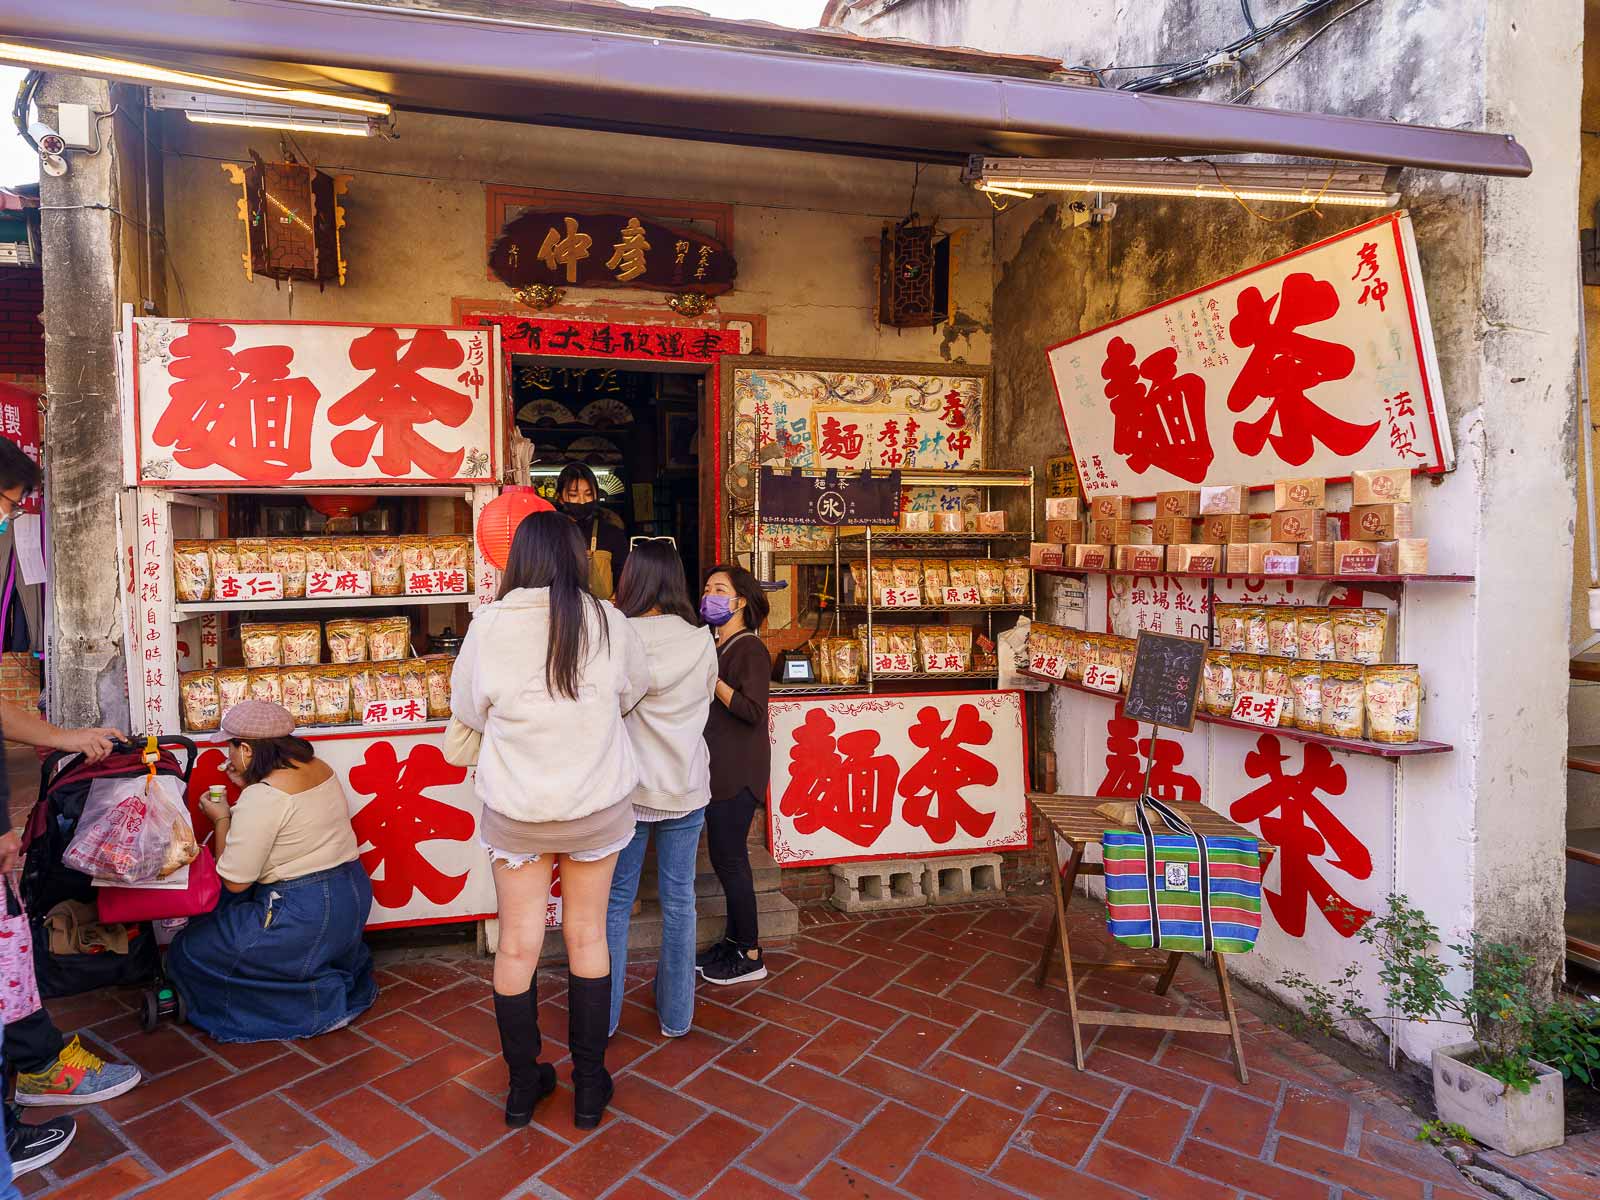 Bags of flour tea are on display outside of this traditional house and shop in Lukang.